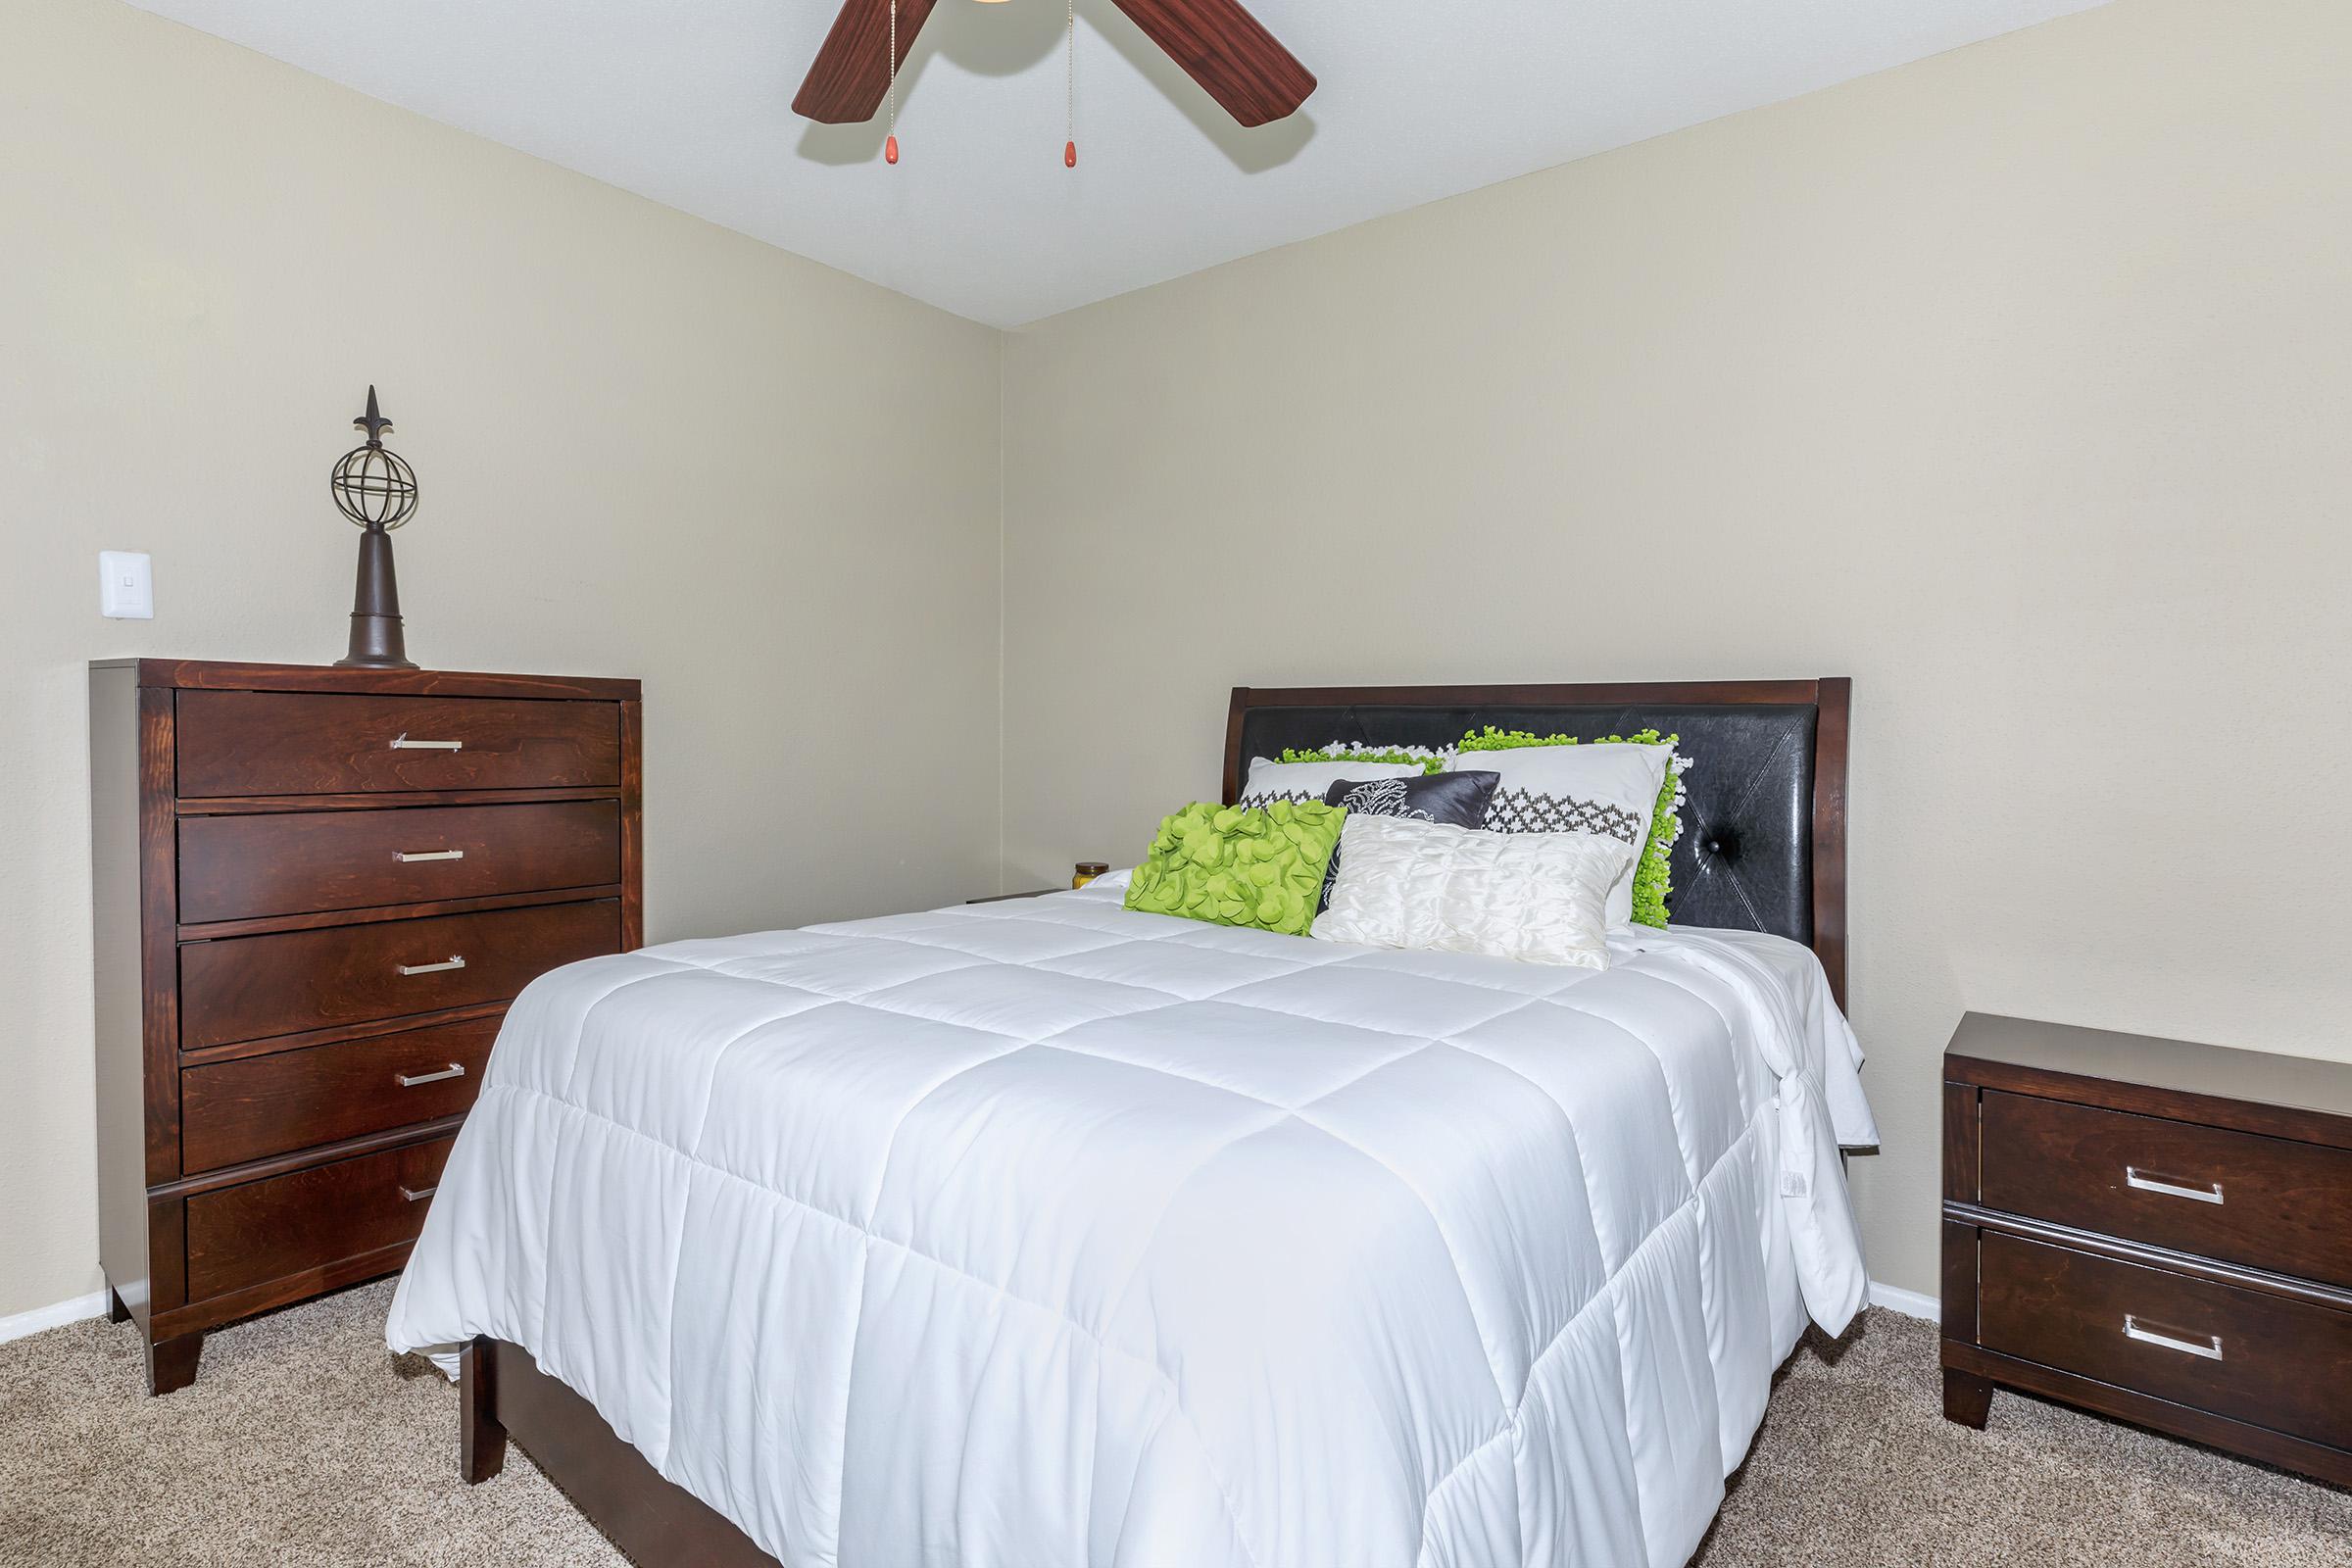 SCHEDULE A TOUR OF OUR PET-FRIENDLY APARTMENTS IN DEER PARK, TX